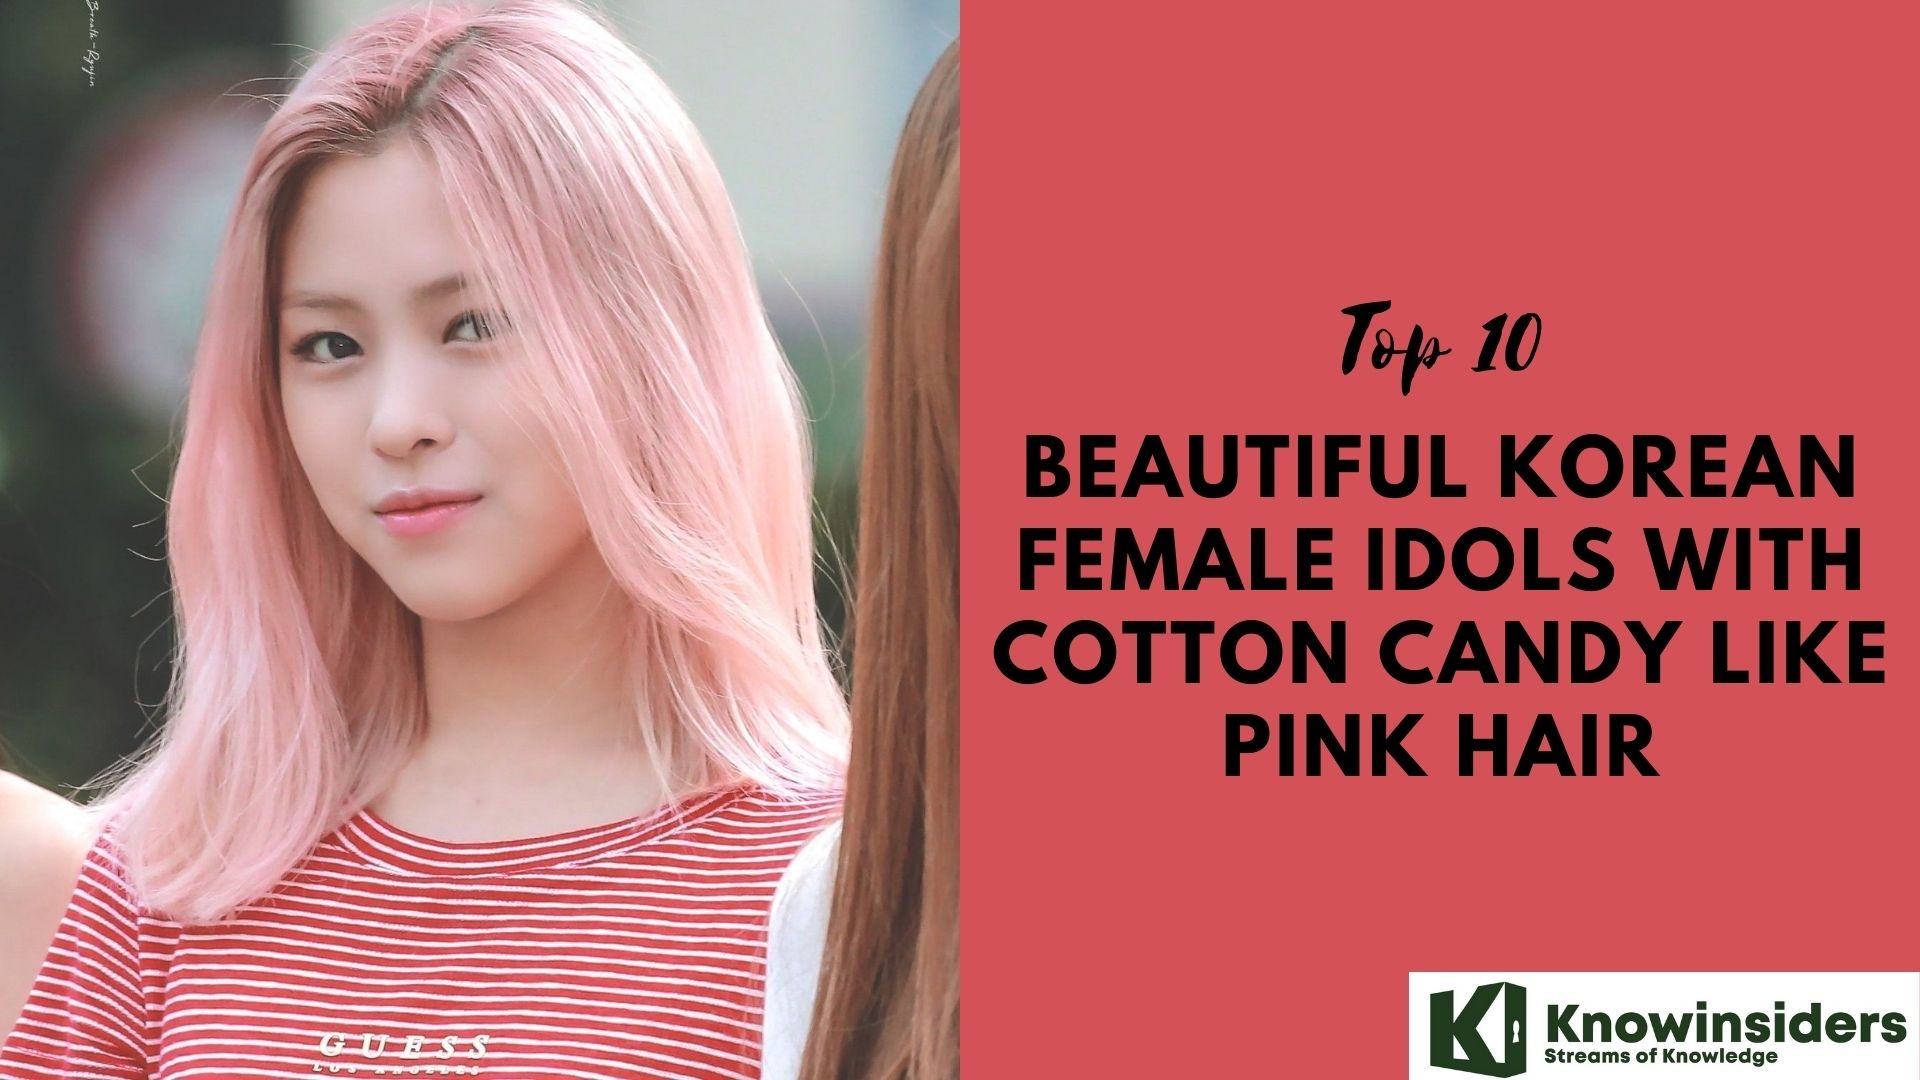 Top 10 Beautiful Korean Female Idols with Cotton Candy Like Pink Hair